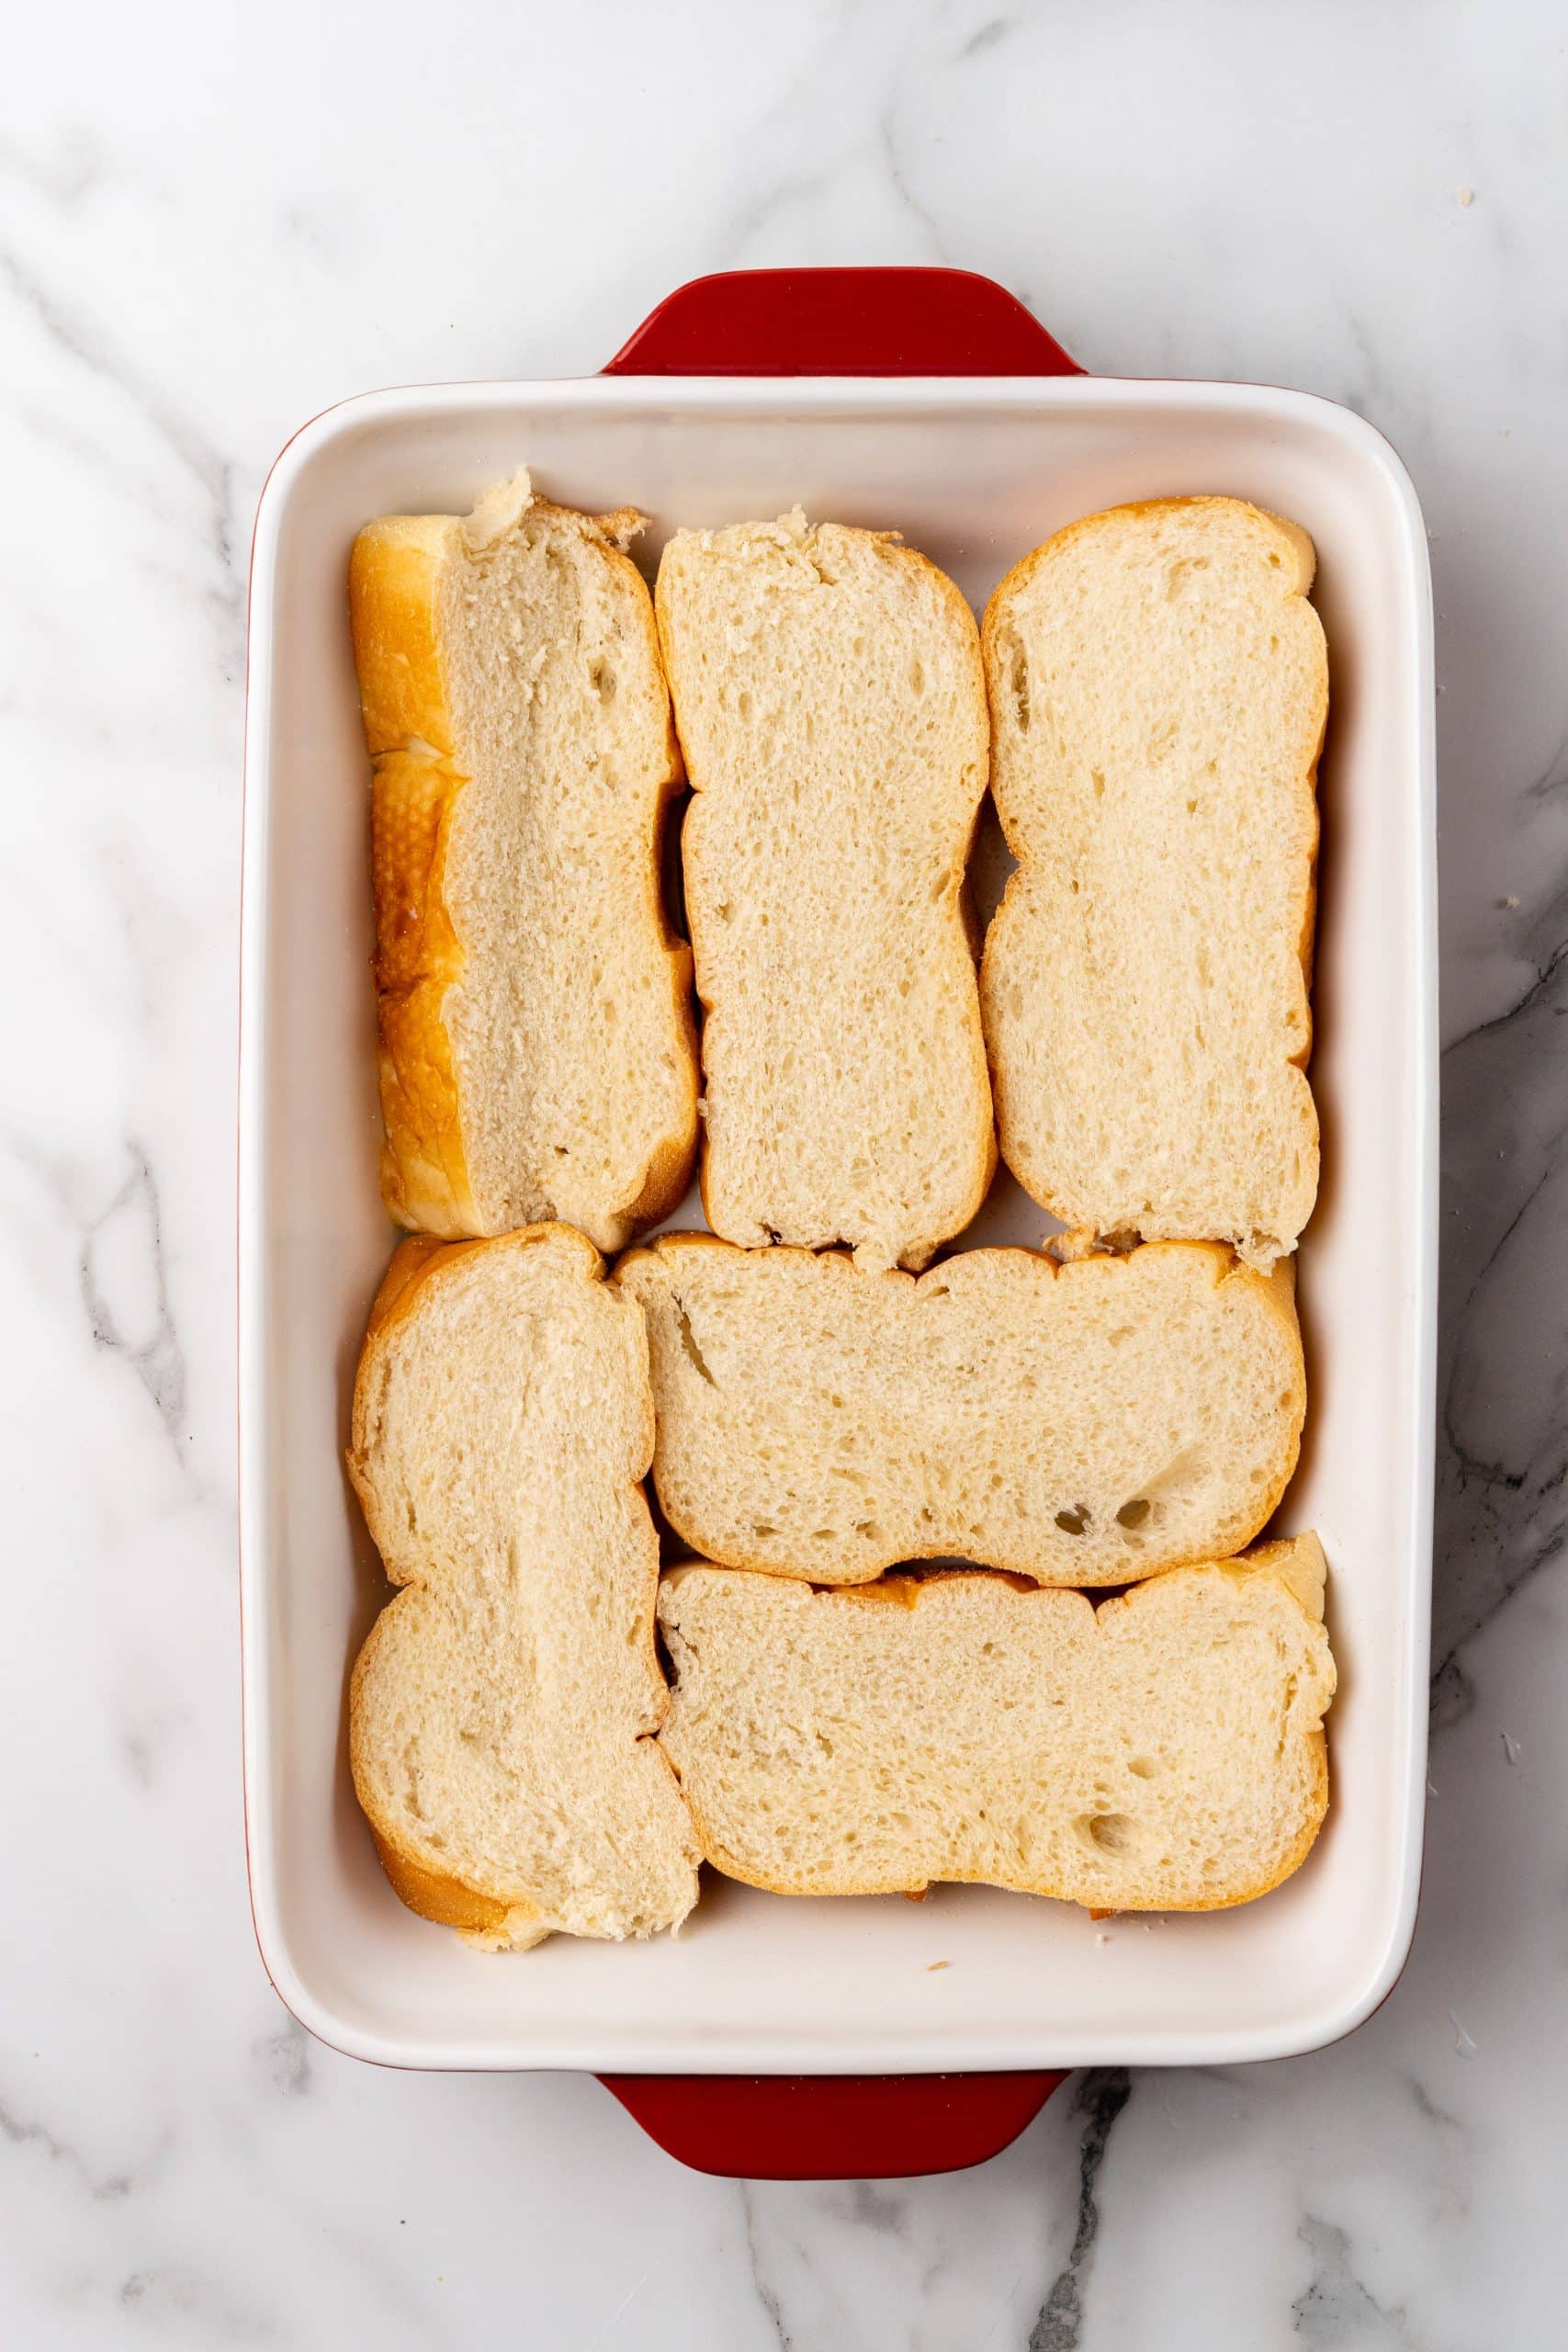 thick slices of Italian bread arranged in the bottom of a white 9x13" baking dish